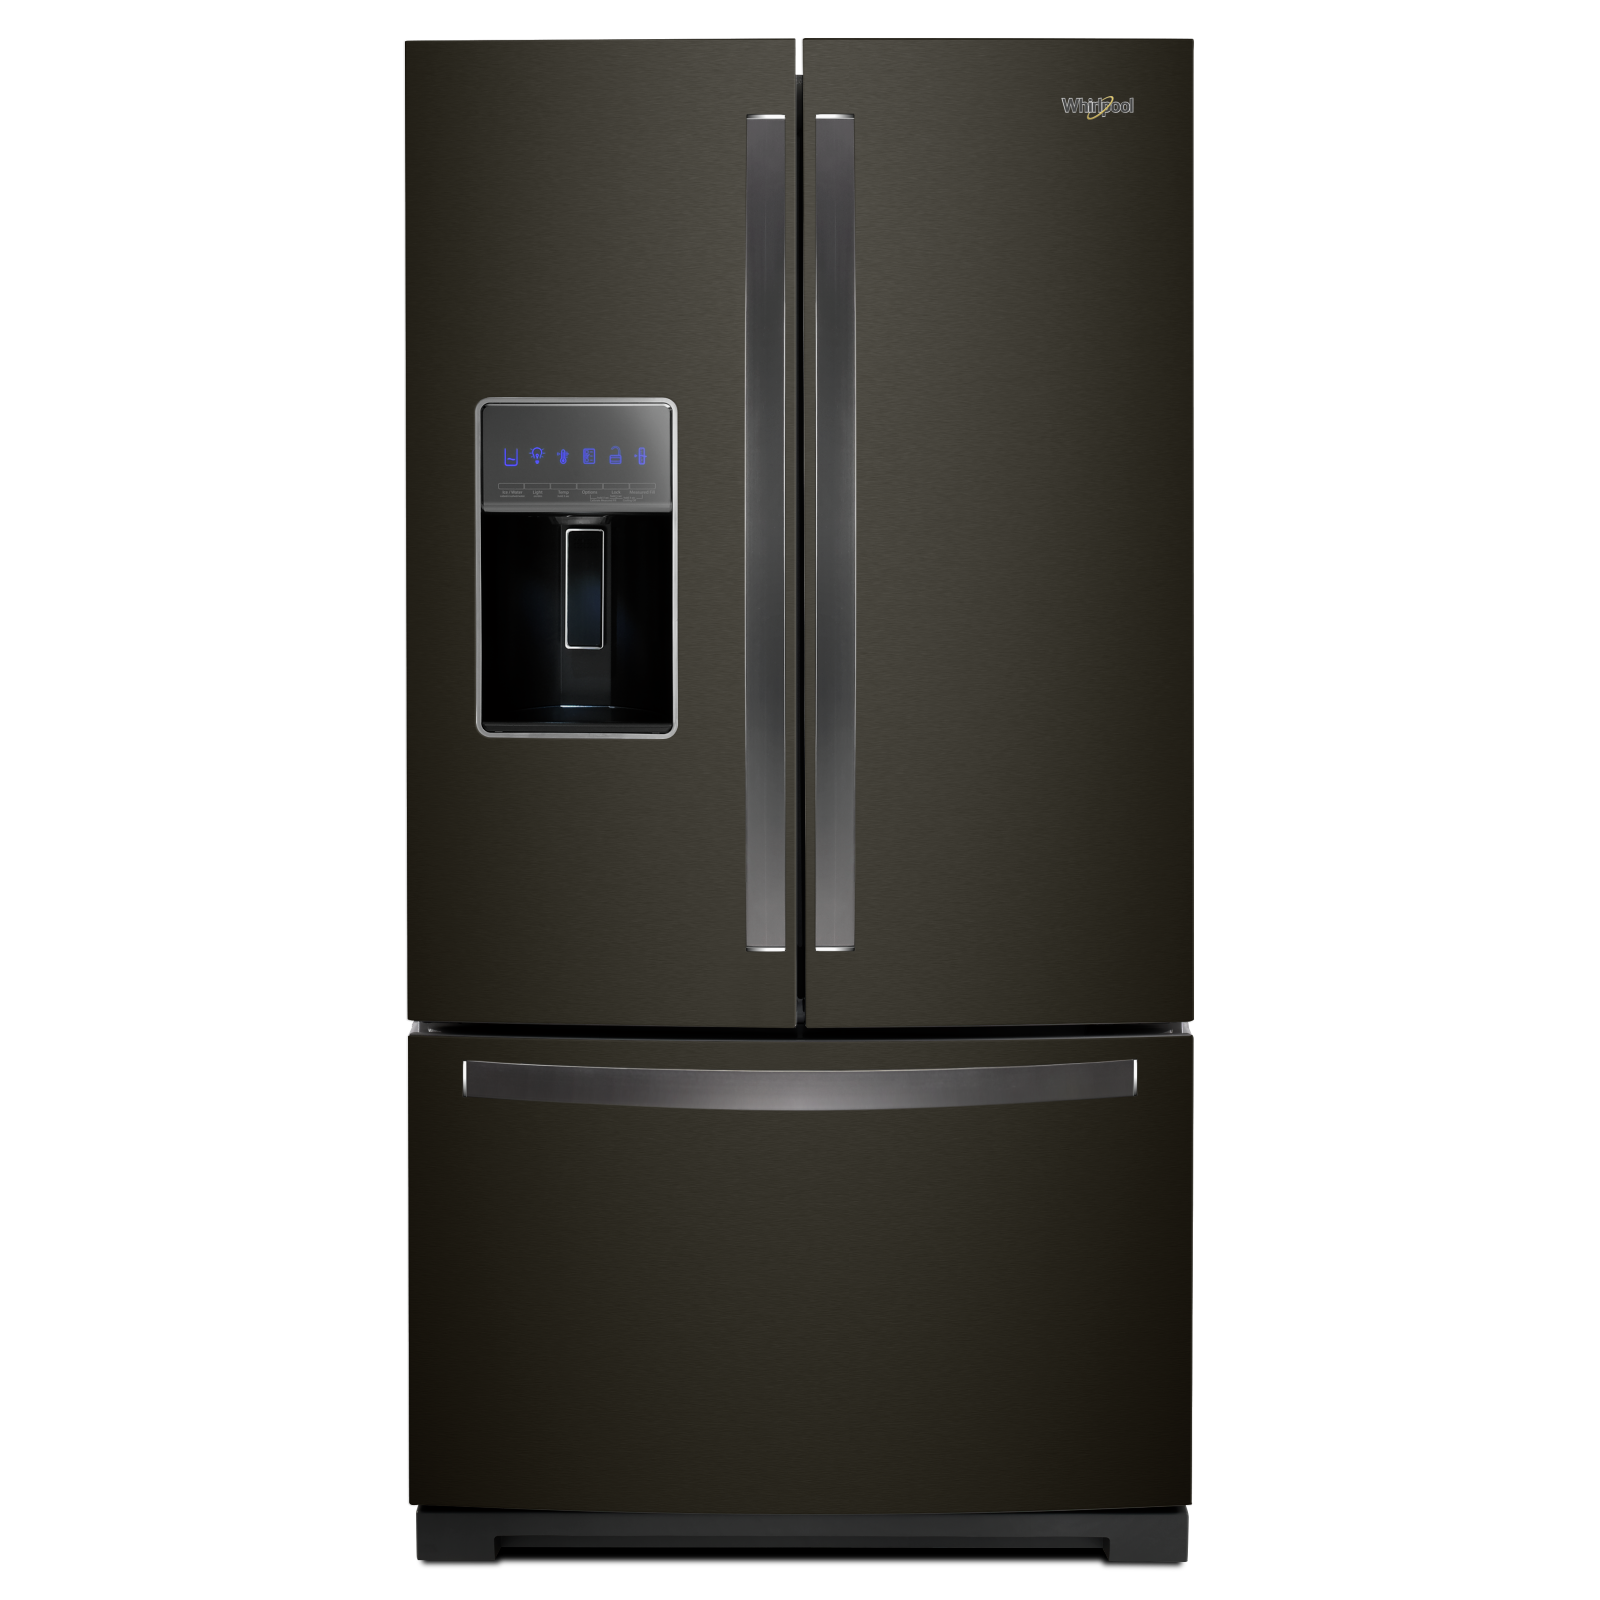 Whirlpool - 35.69 Inch 27 cu. ft French Door Refrigerator in Black Stainless - WRF767SDHV